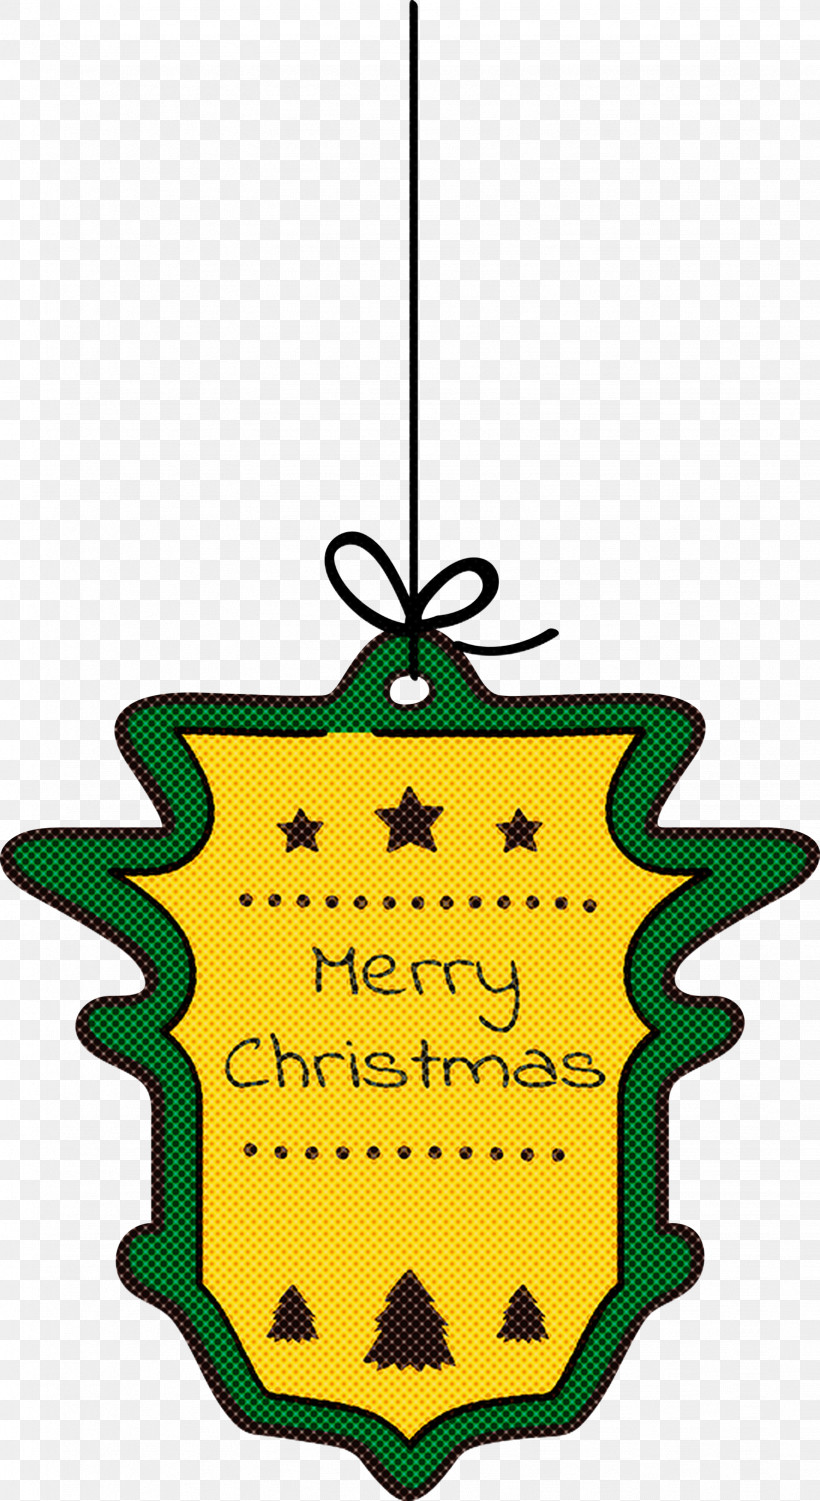 Christmas Fonts Merry Christmas Fonts, PNG, 1637x2998px, Christmas Fonts, Green, Holiday Ornament, Merry Christmas Fonts Download Free